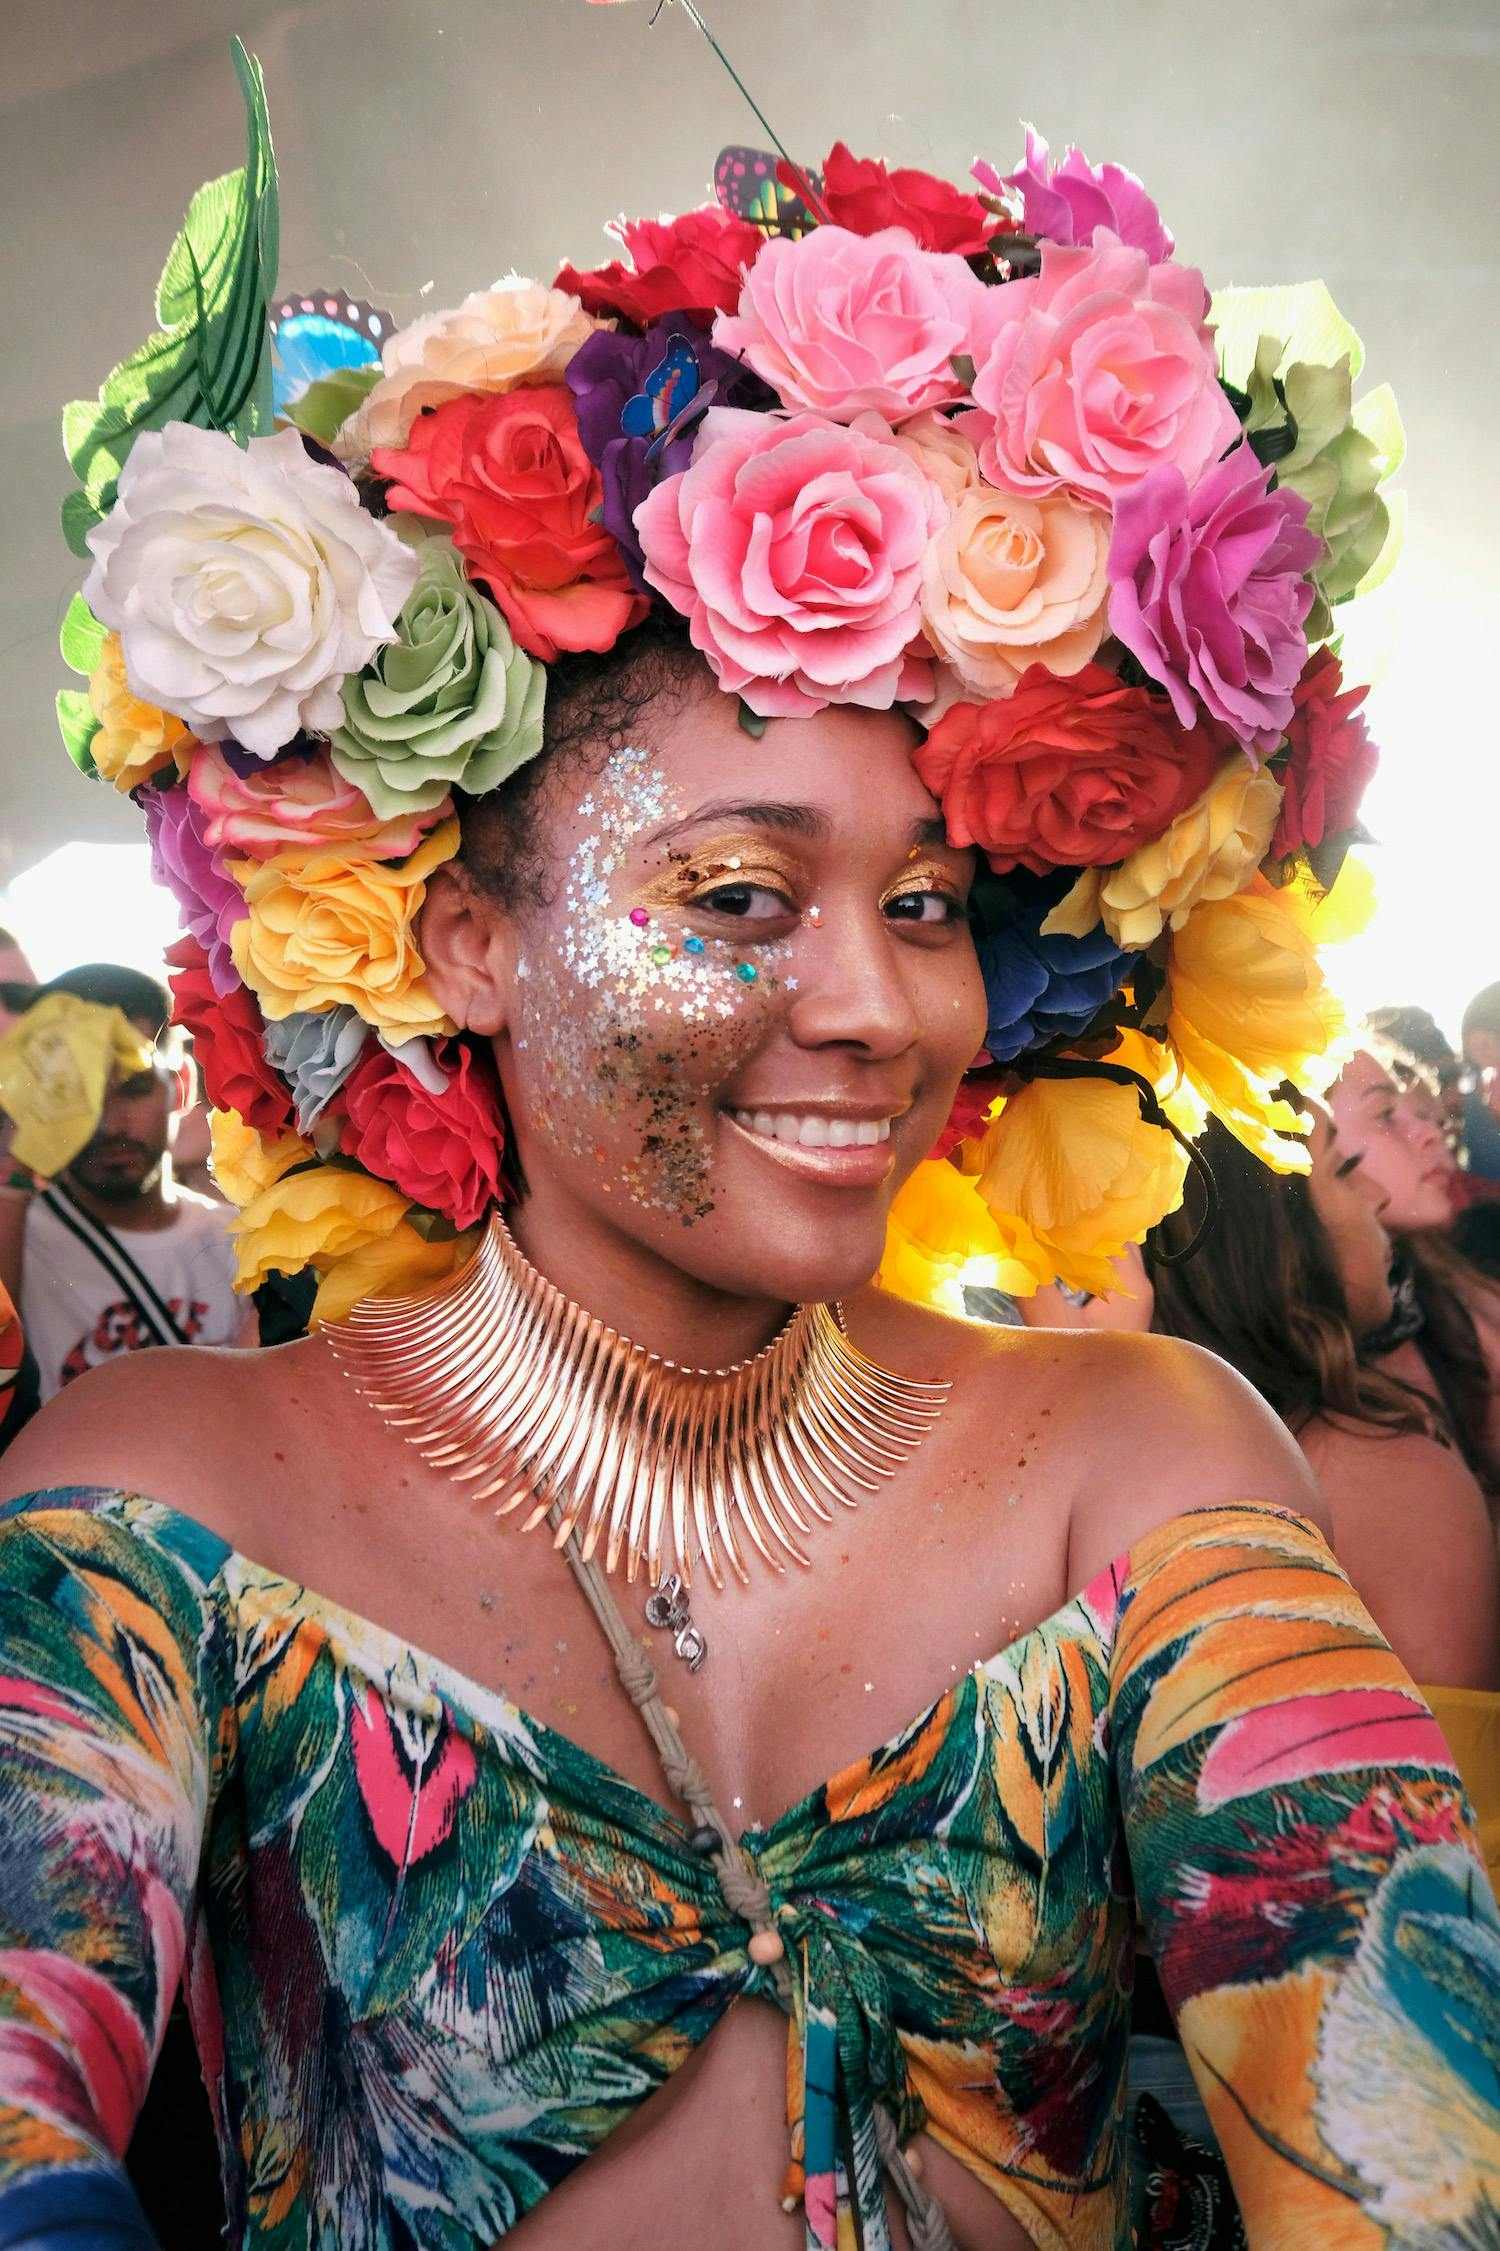 Coachella attendees with festival makeup and a colorful flower hat